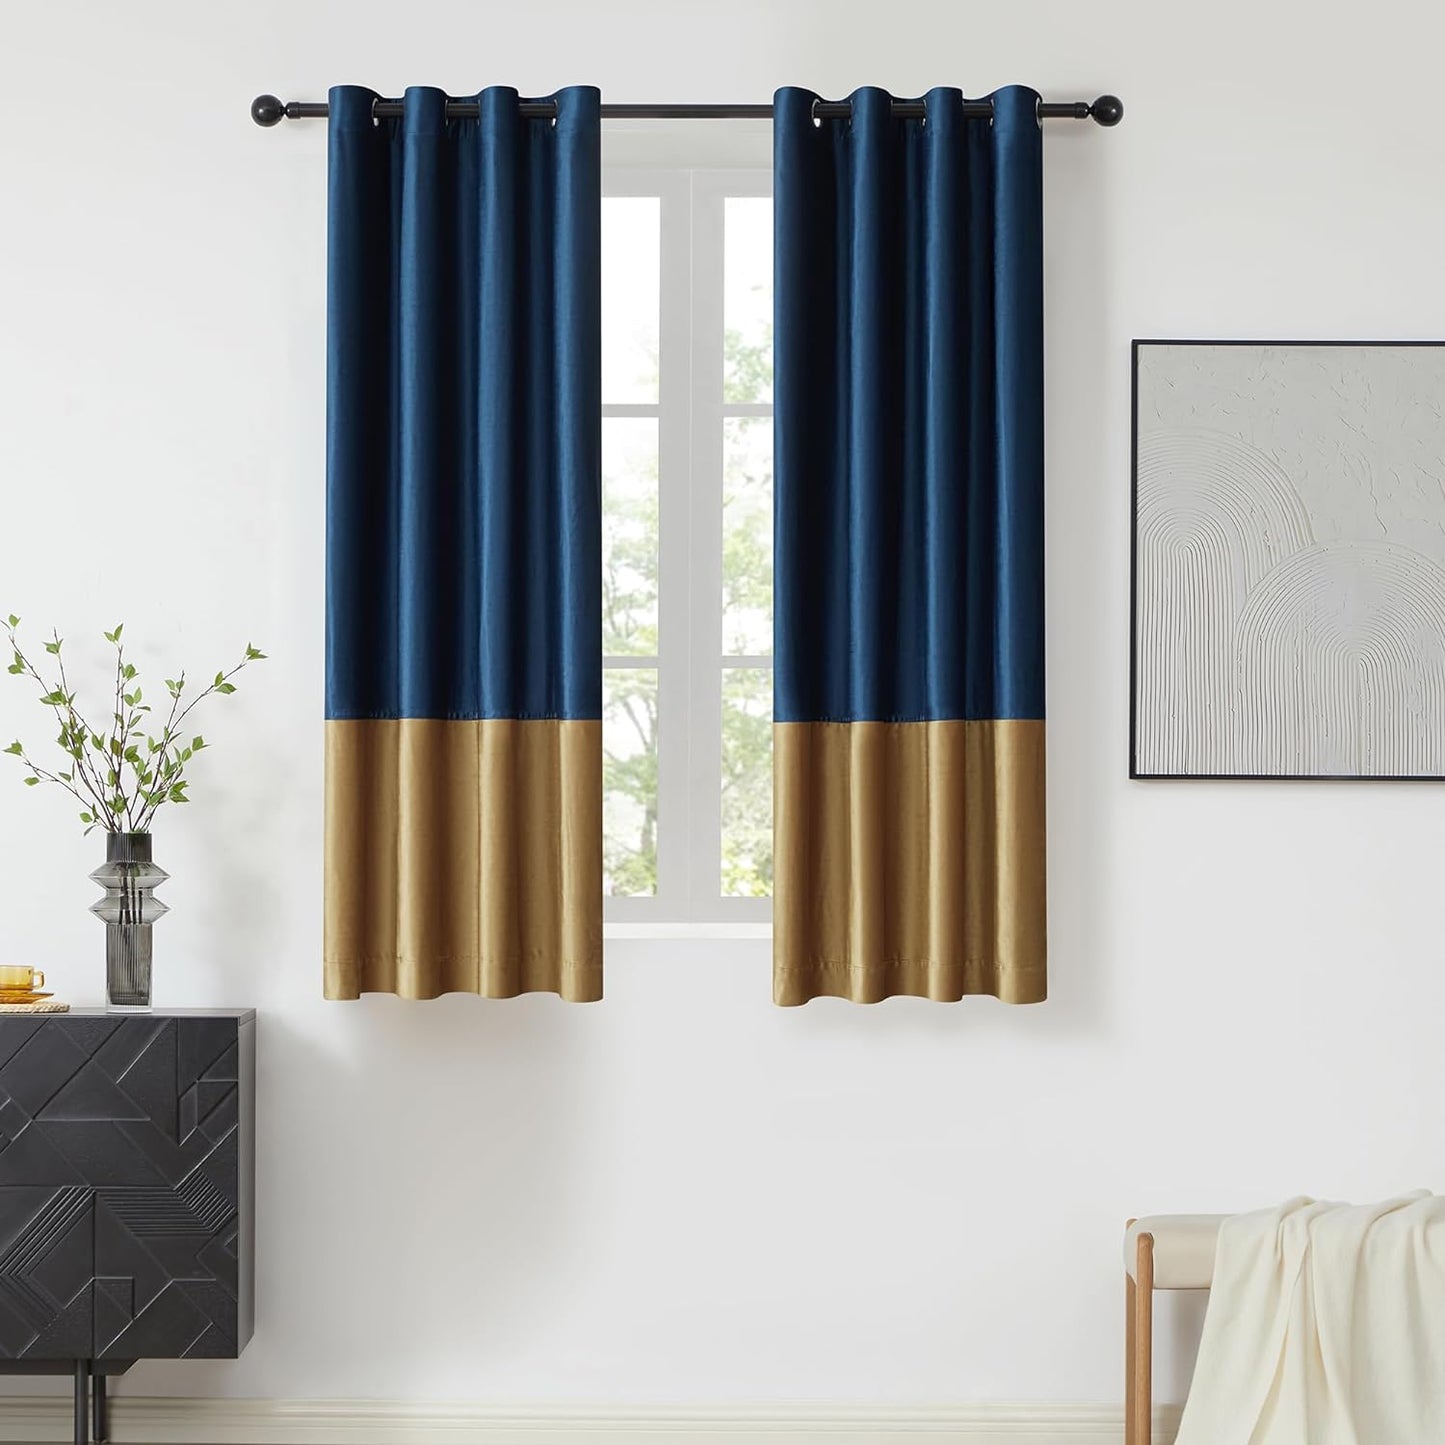 BULBUL Color Block Window Curtains Panels 84 Inches Long Cream Ivory Gold Velvet Farmhouse Drapes for Bedroom Living Room Darkening Treatment with Grommet Set of 2  BULBUL Navy Blue  Gold 52"W X 63"L 